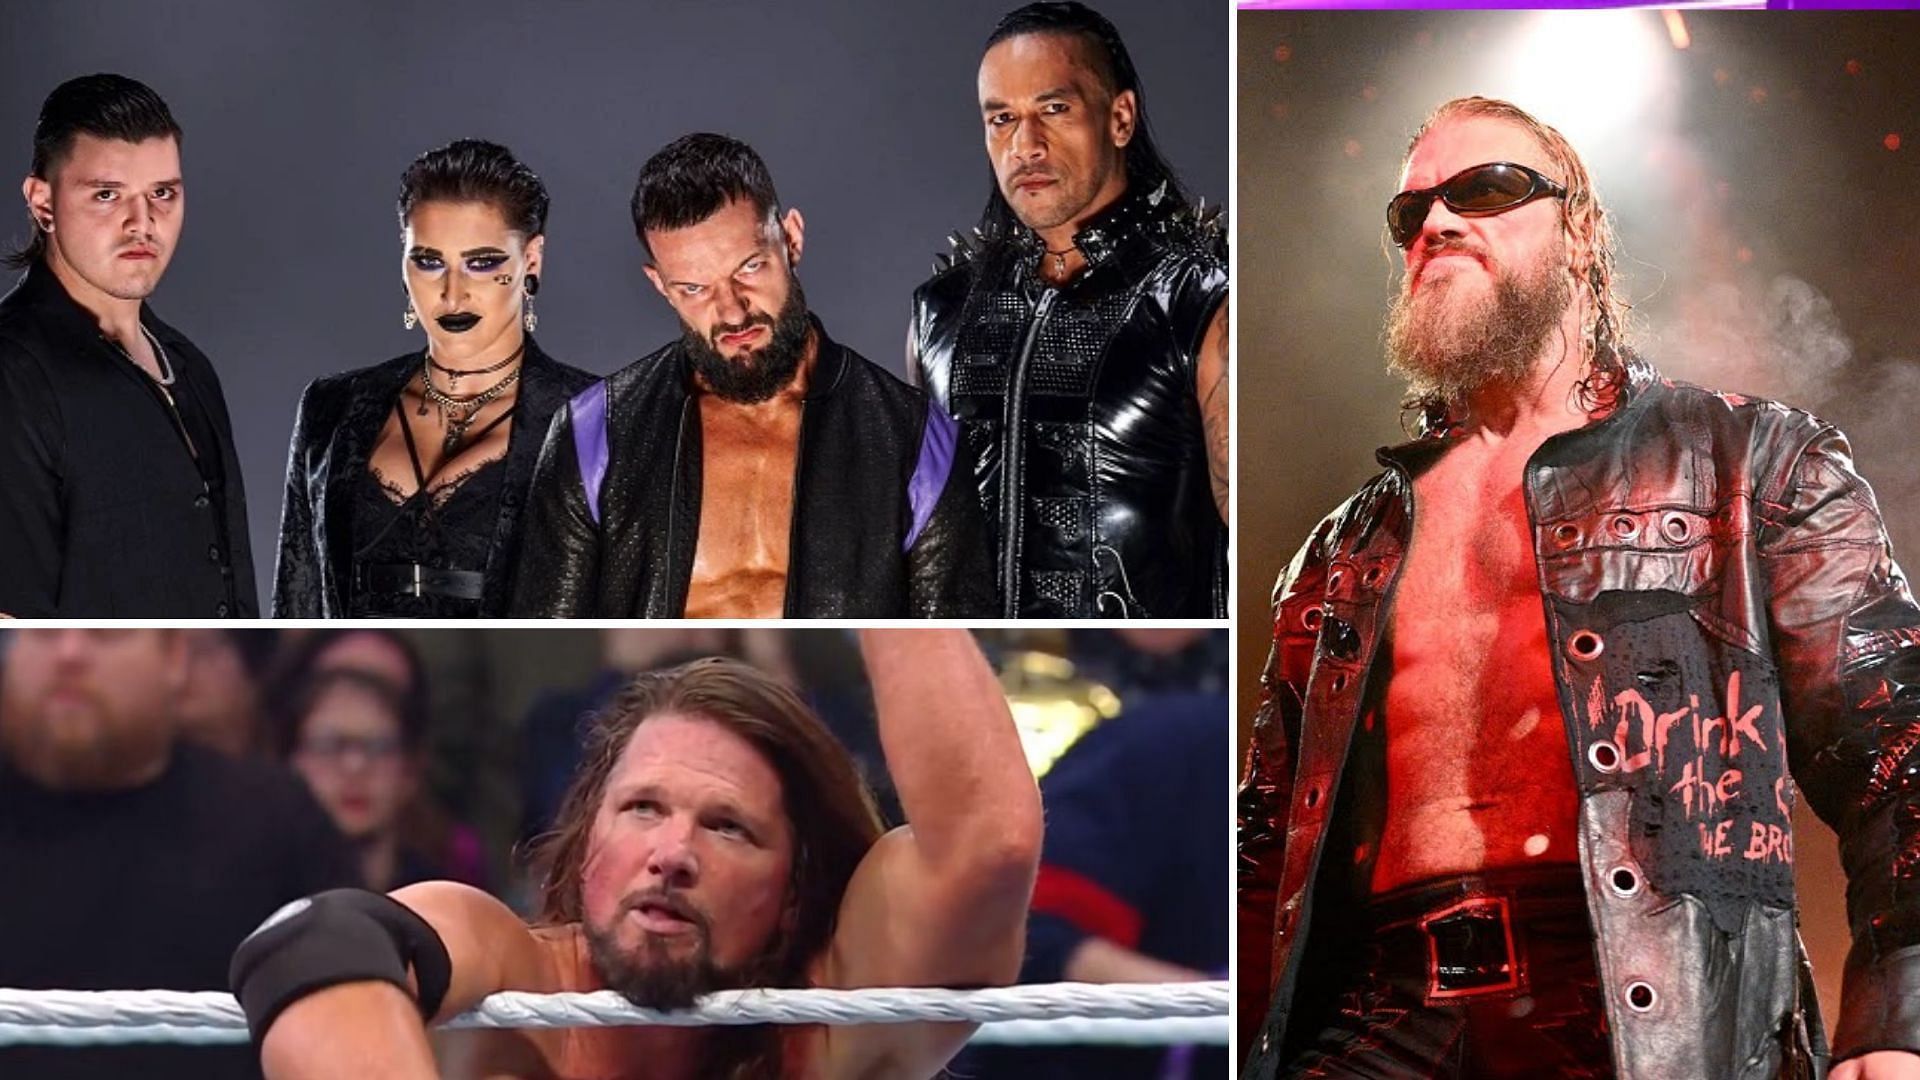 The story of Judgment Day in 2022 revolved around these WWE Superstars